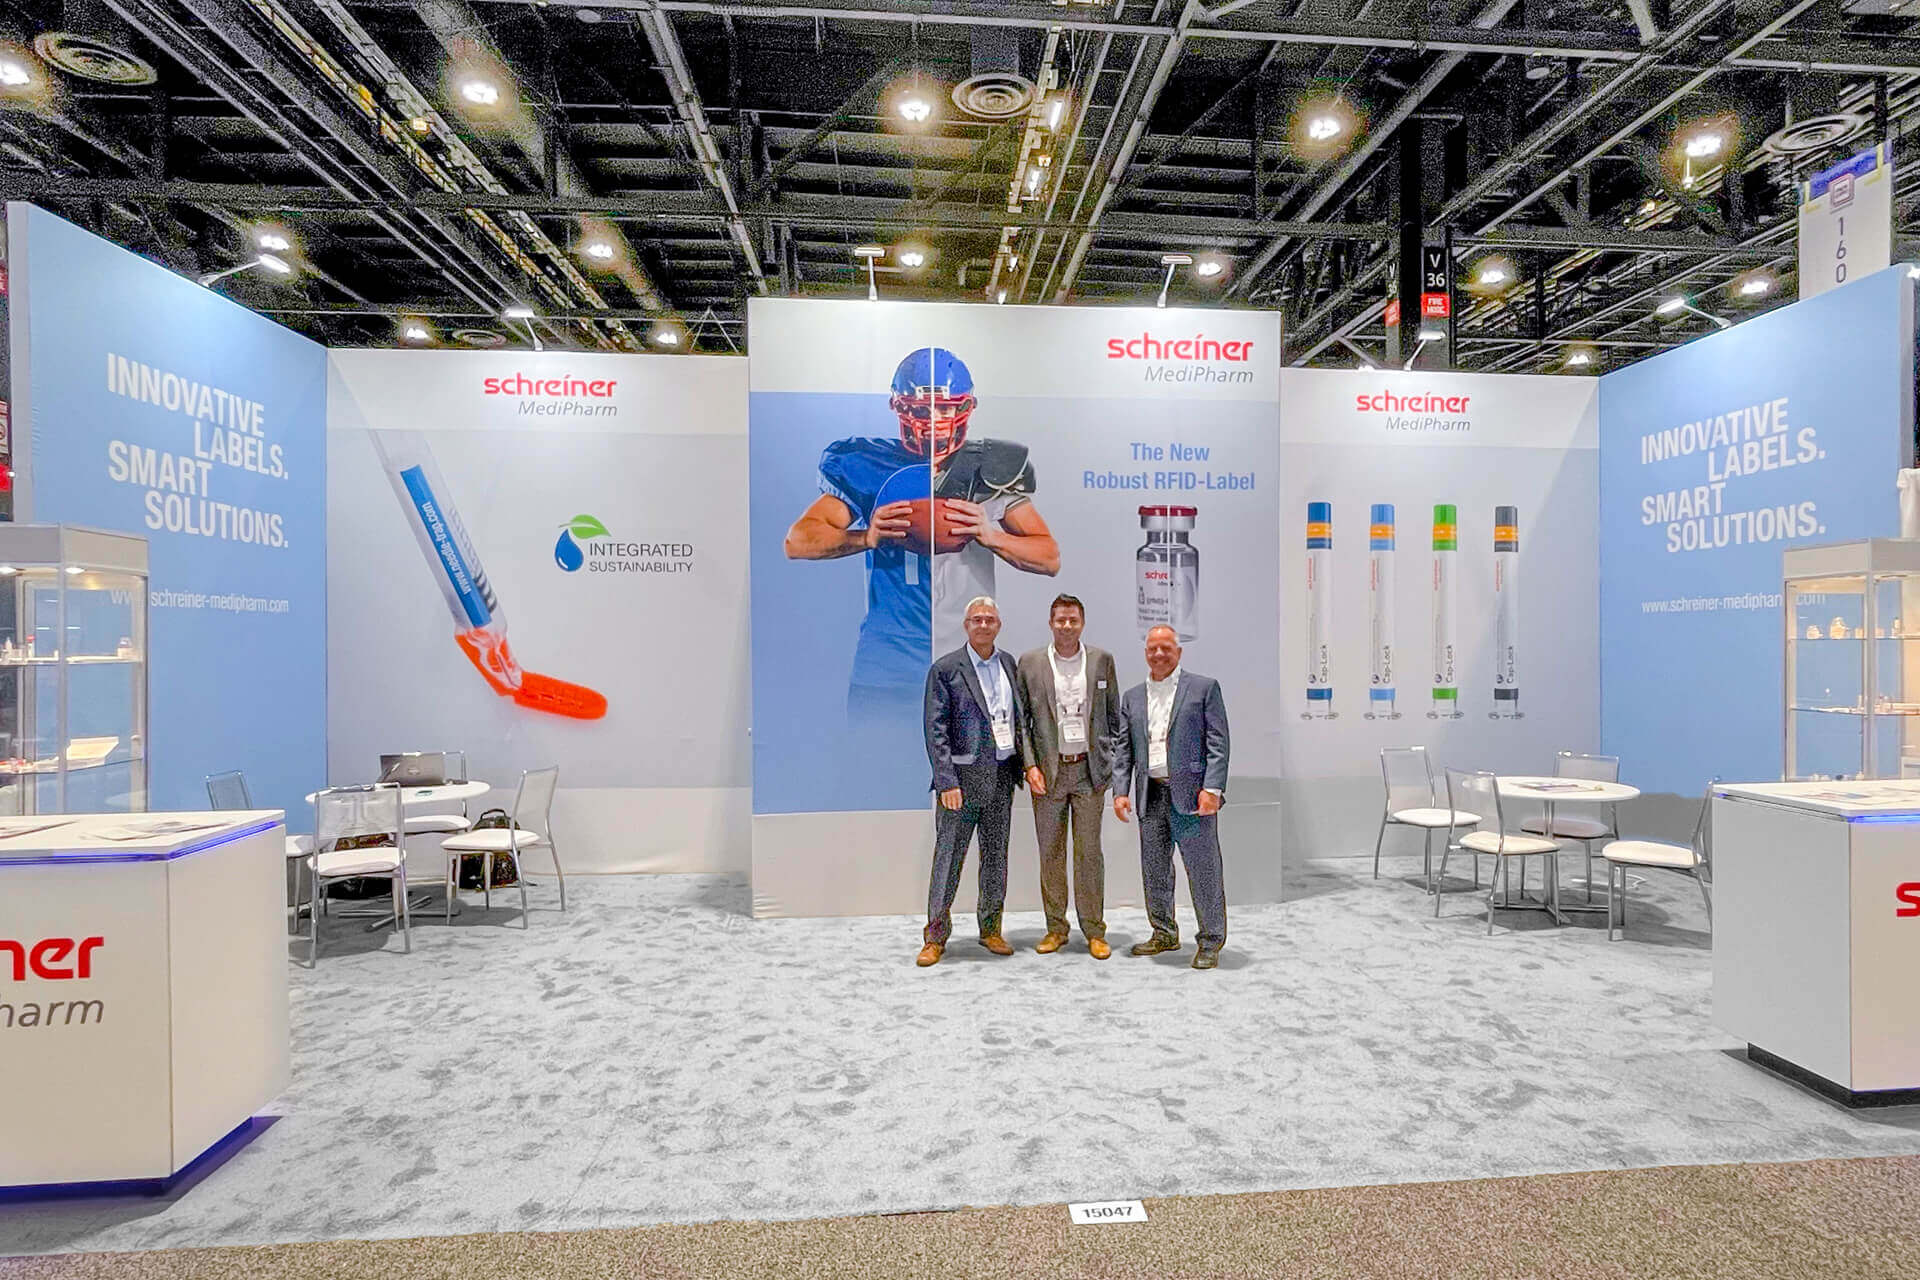 Pack Expo: Pack Expo in Chicago held in October 2022 attracted more than 44,000 visitors. Schreiner MediPharm’s product highlights met with excellent response there.